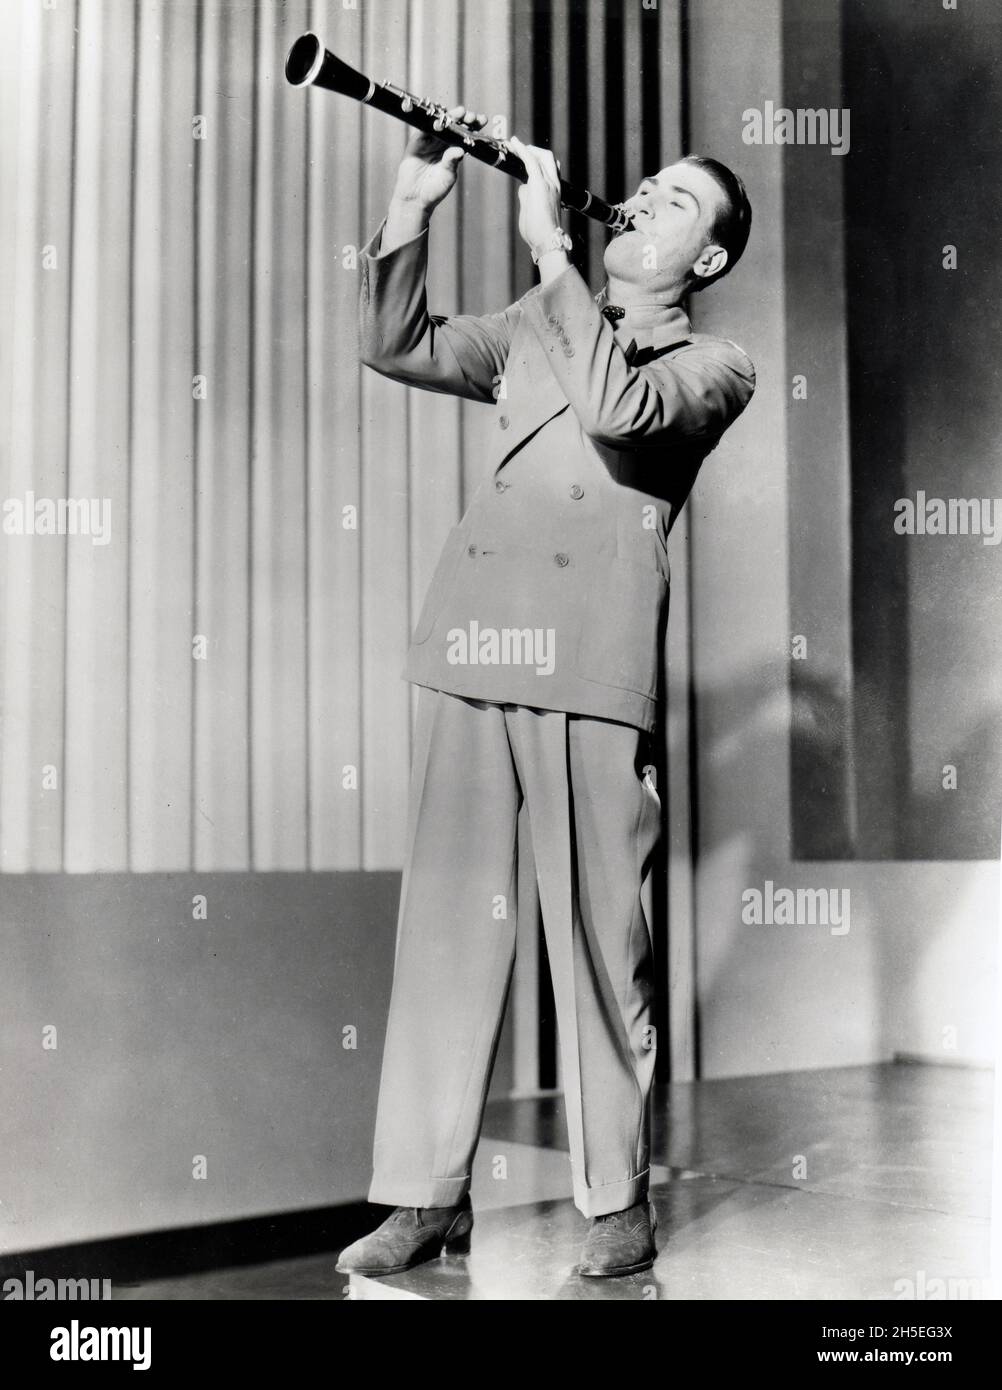 A posed publicity photo of jazz clarinetist and bandleader Artie Shaw. Likely from the late 1930s. Stock Photo